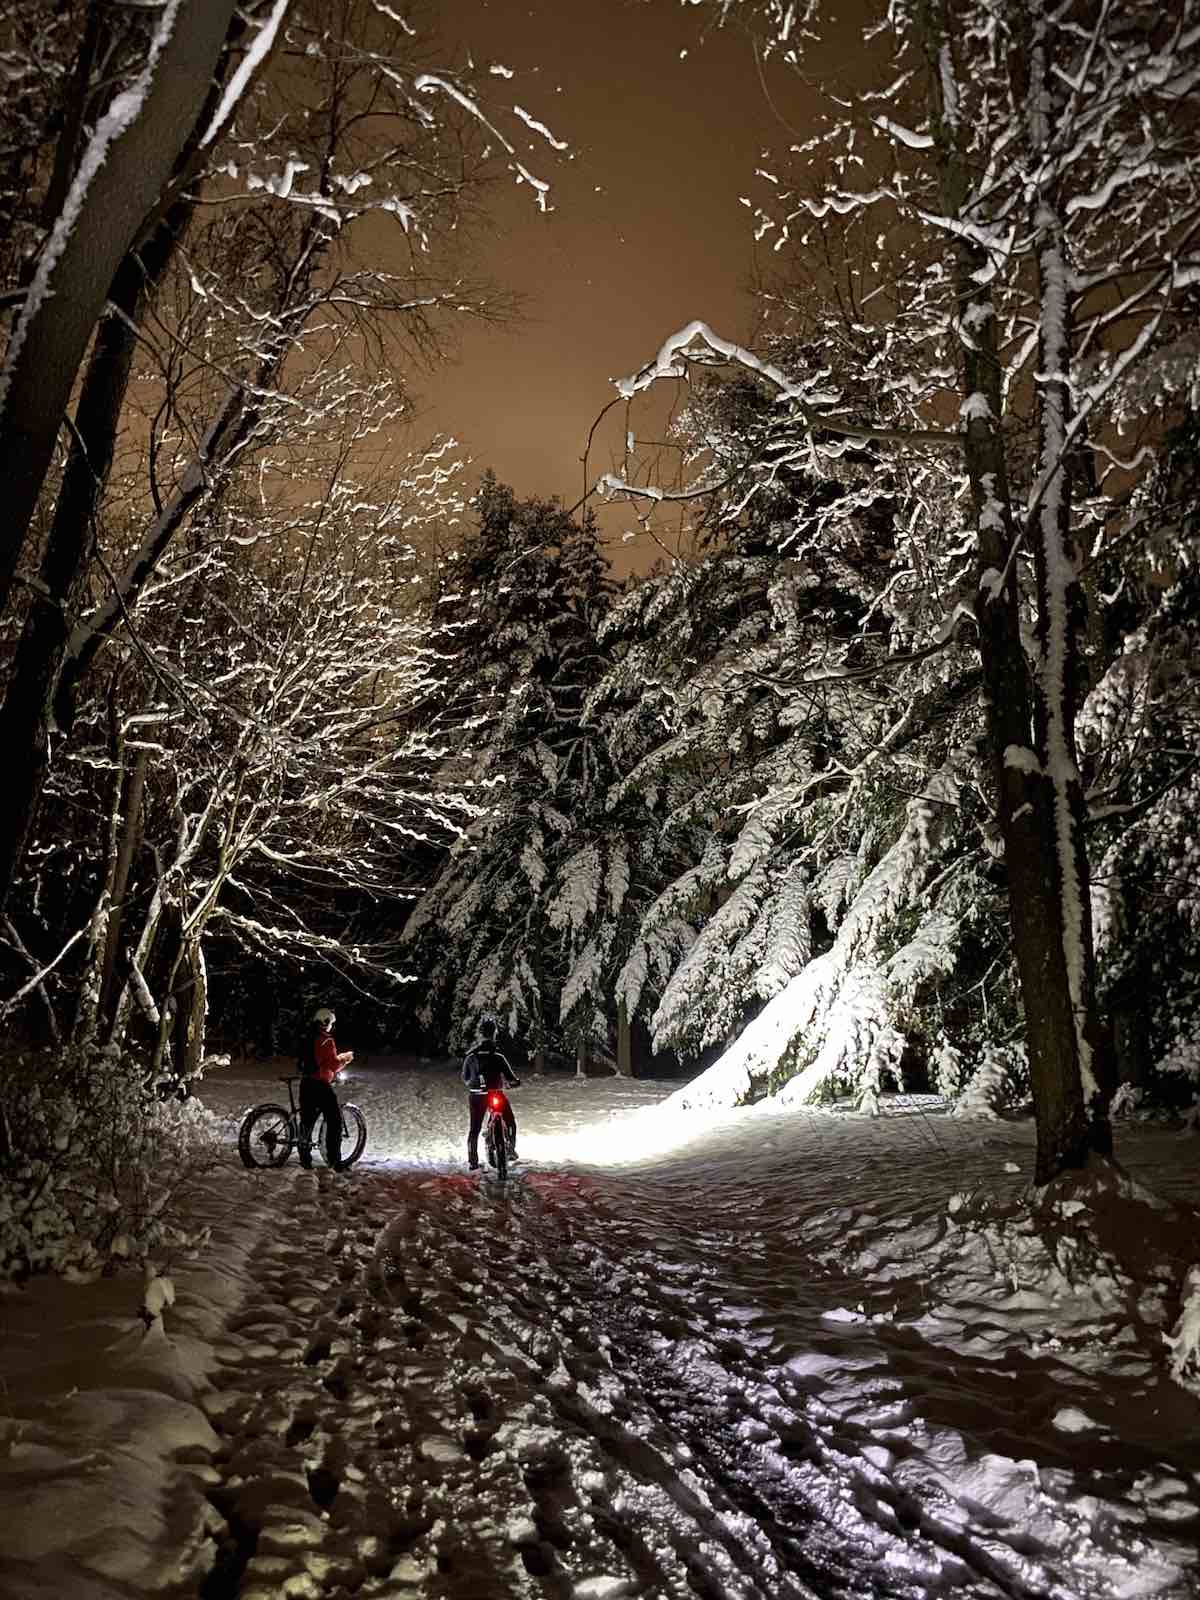 bikerumor pic of the day two cyclists on fat bikes on a snowy trail their lights lighting up the snow covered trees and the sky glows brown with the city lights reflected off the heavy clouds